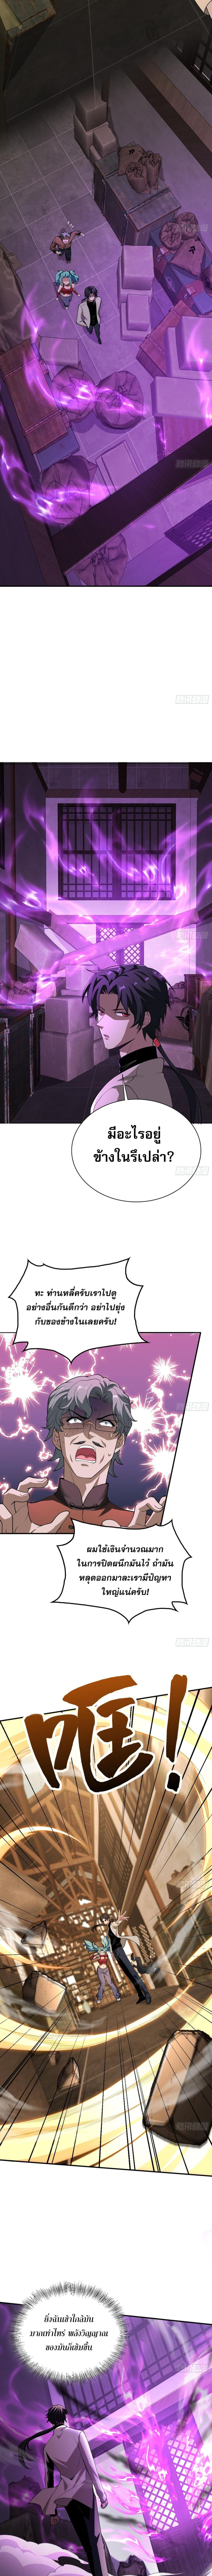 The All-Knowing Cultivator ผู้ฝึกตนผู้รอบรู้ 7/11